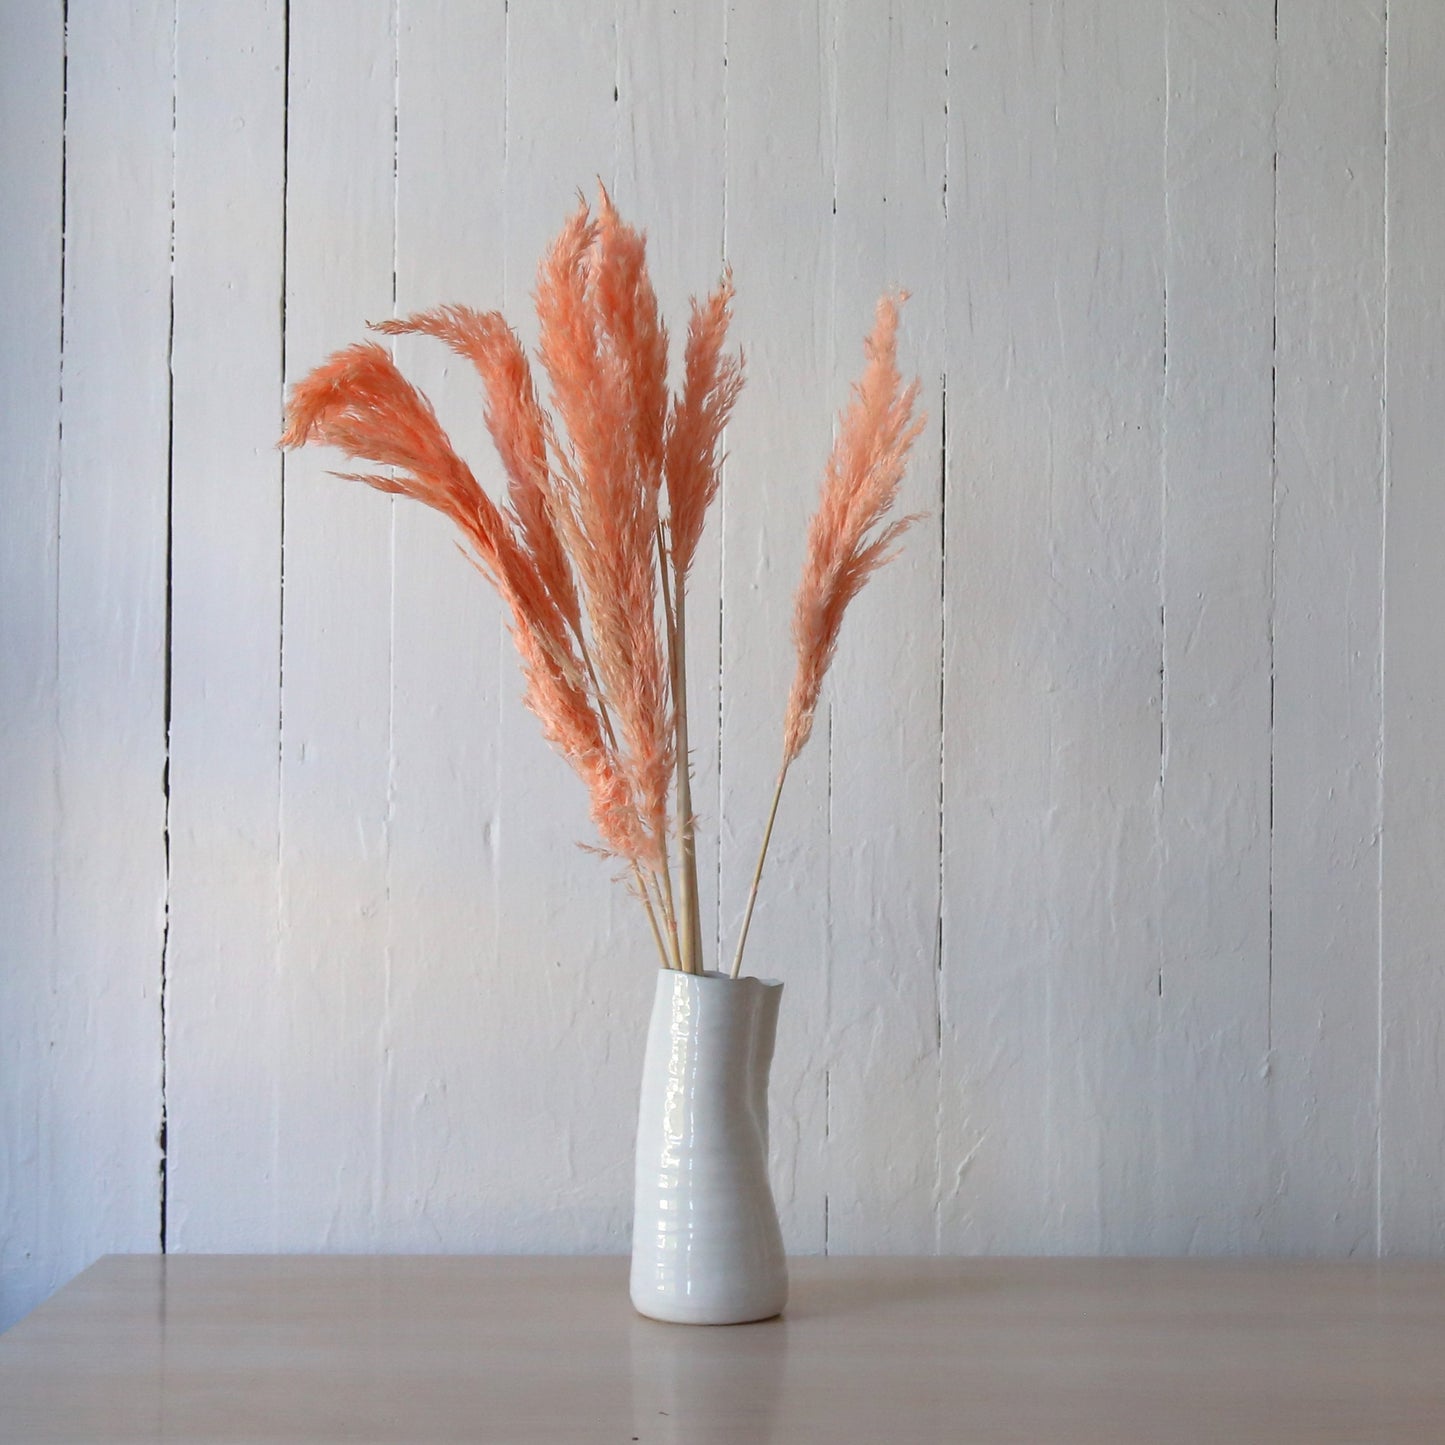 Pink mini pampas grass bunch available at Rook & Rose.